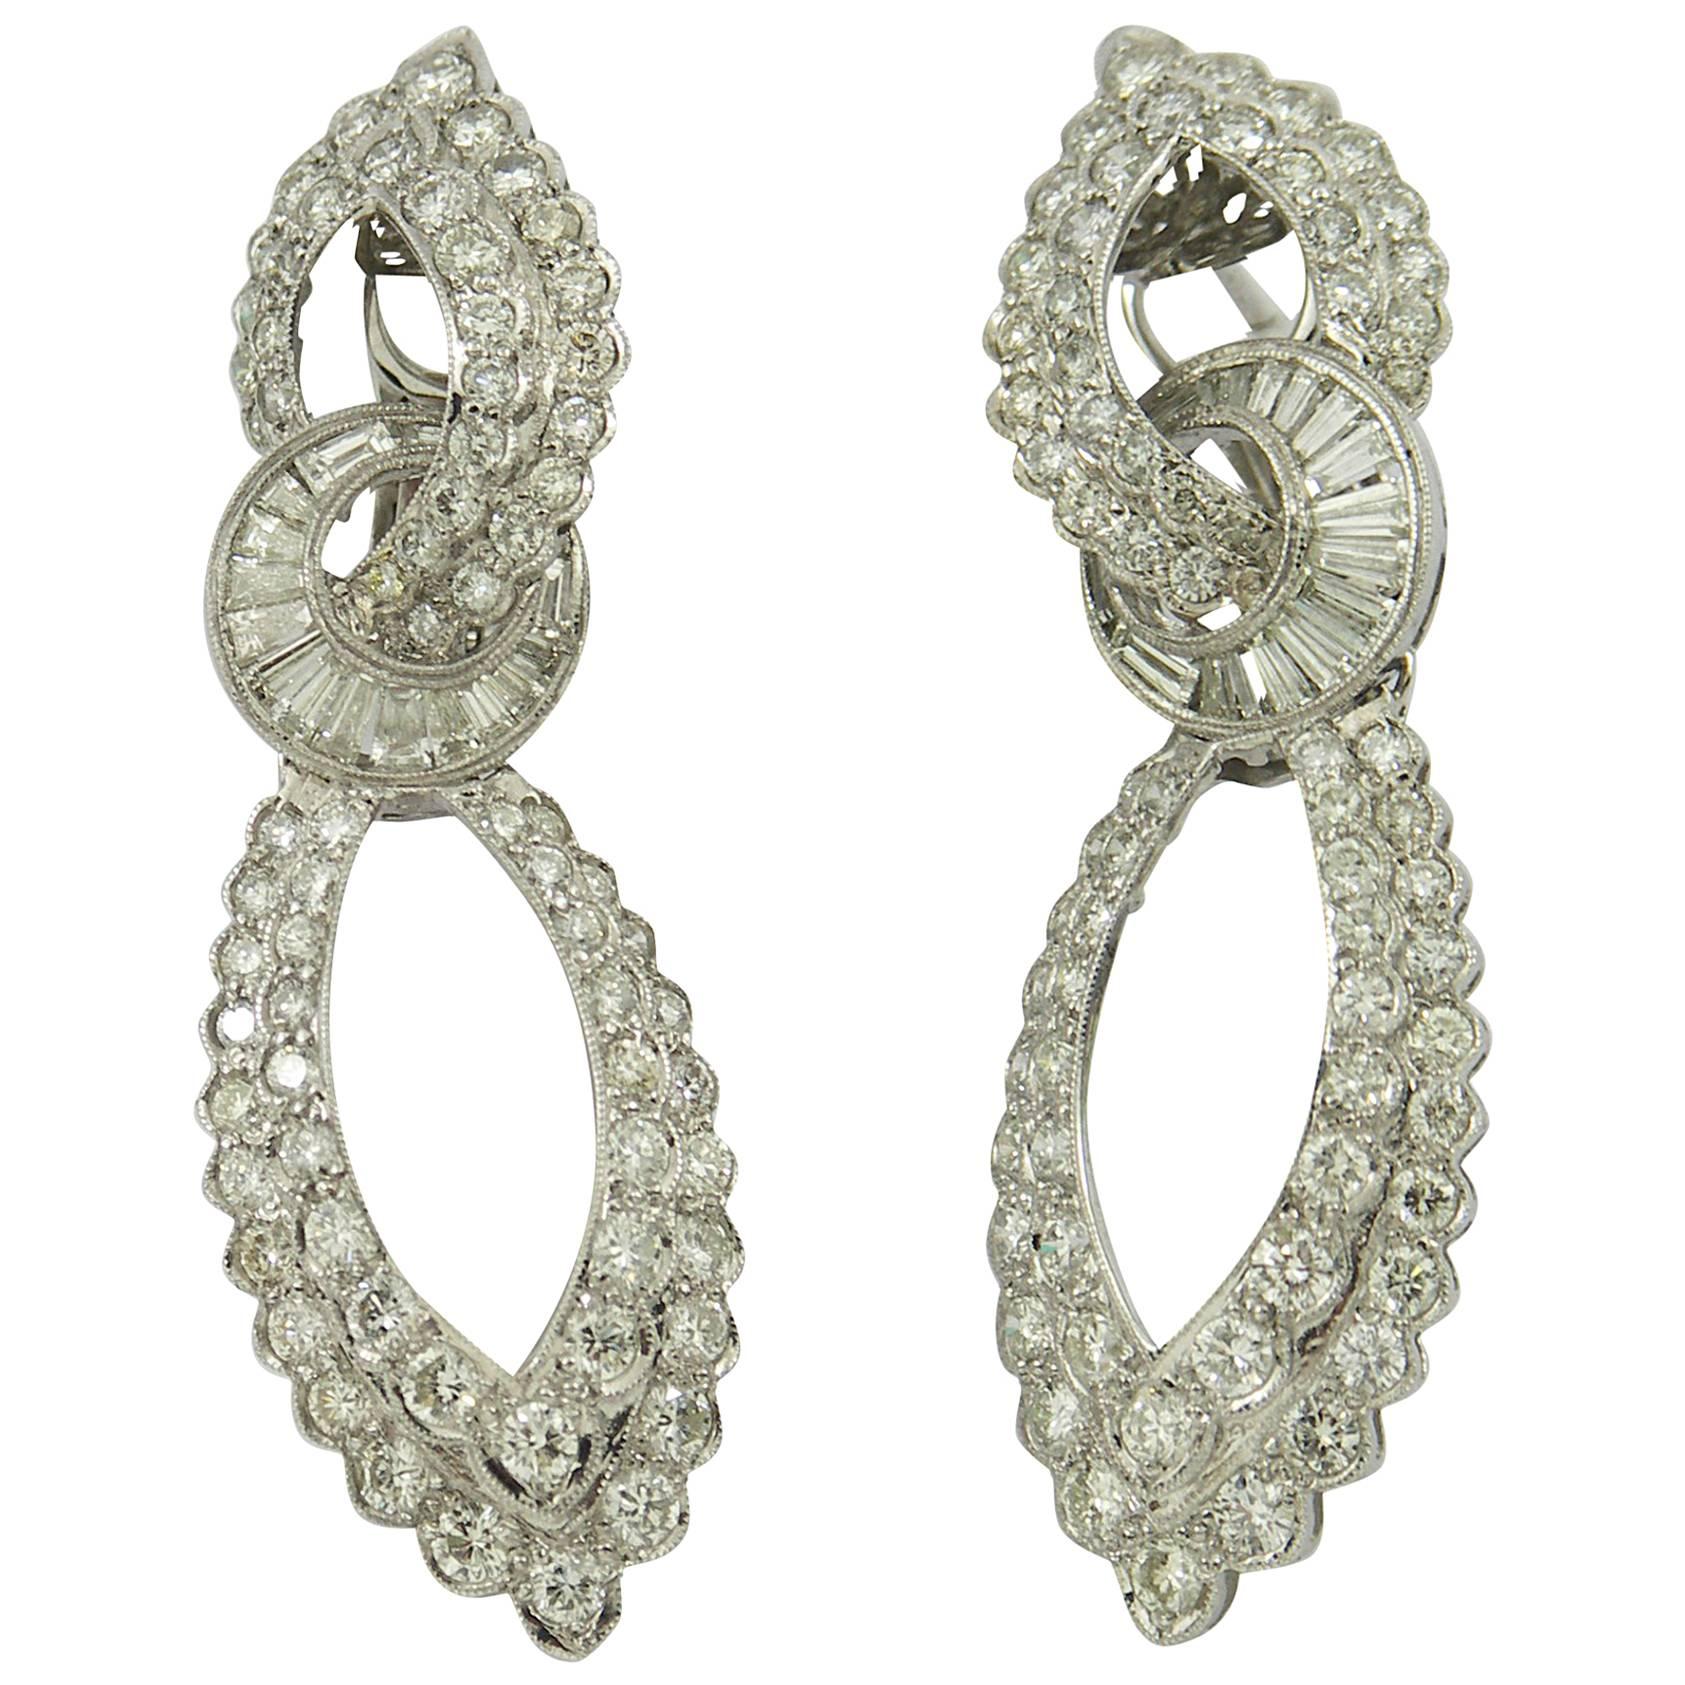 Tailored Looking White Gold Hanging Earrings Set with Diamonds